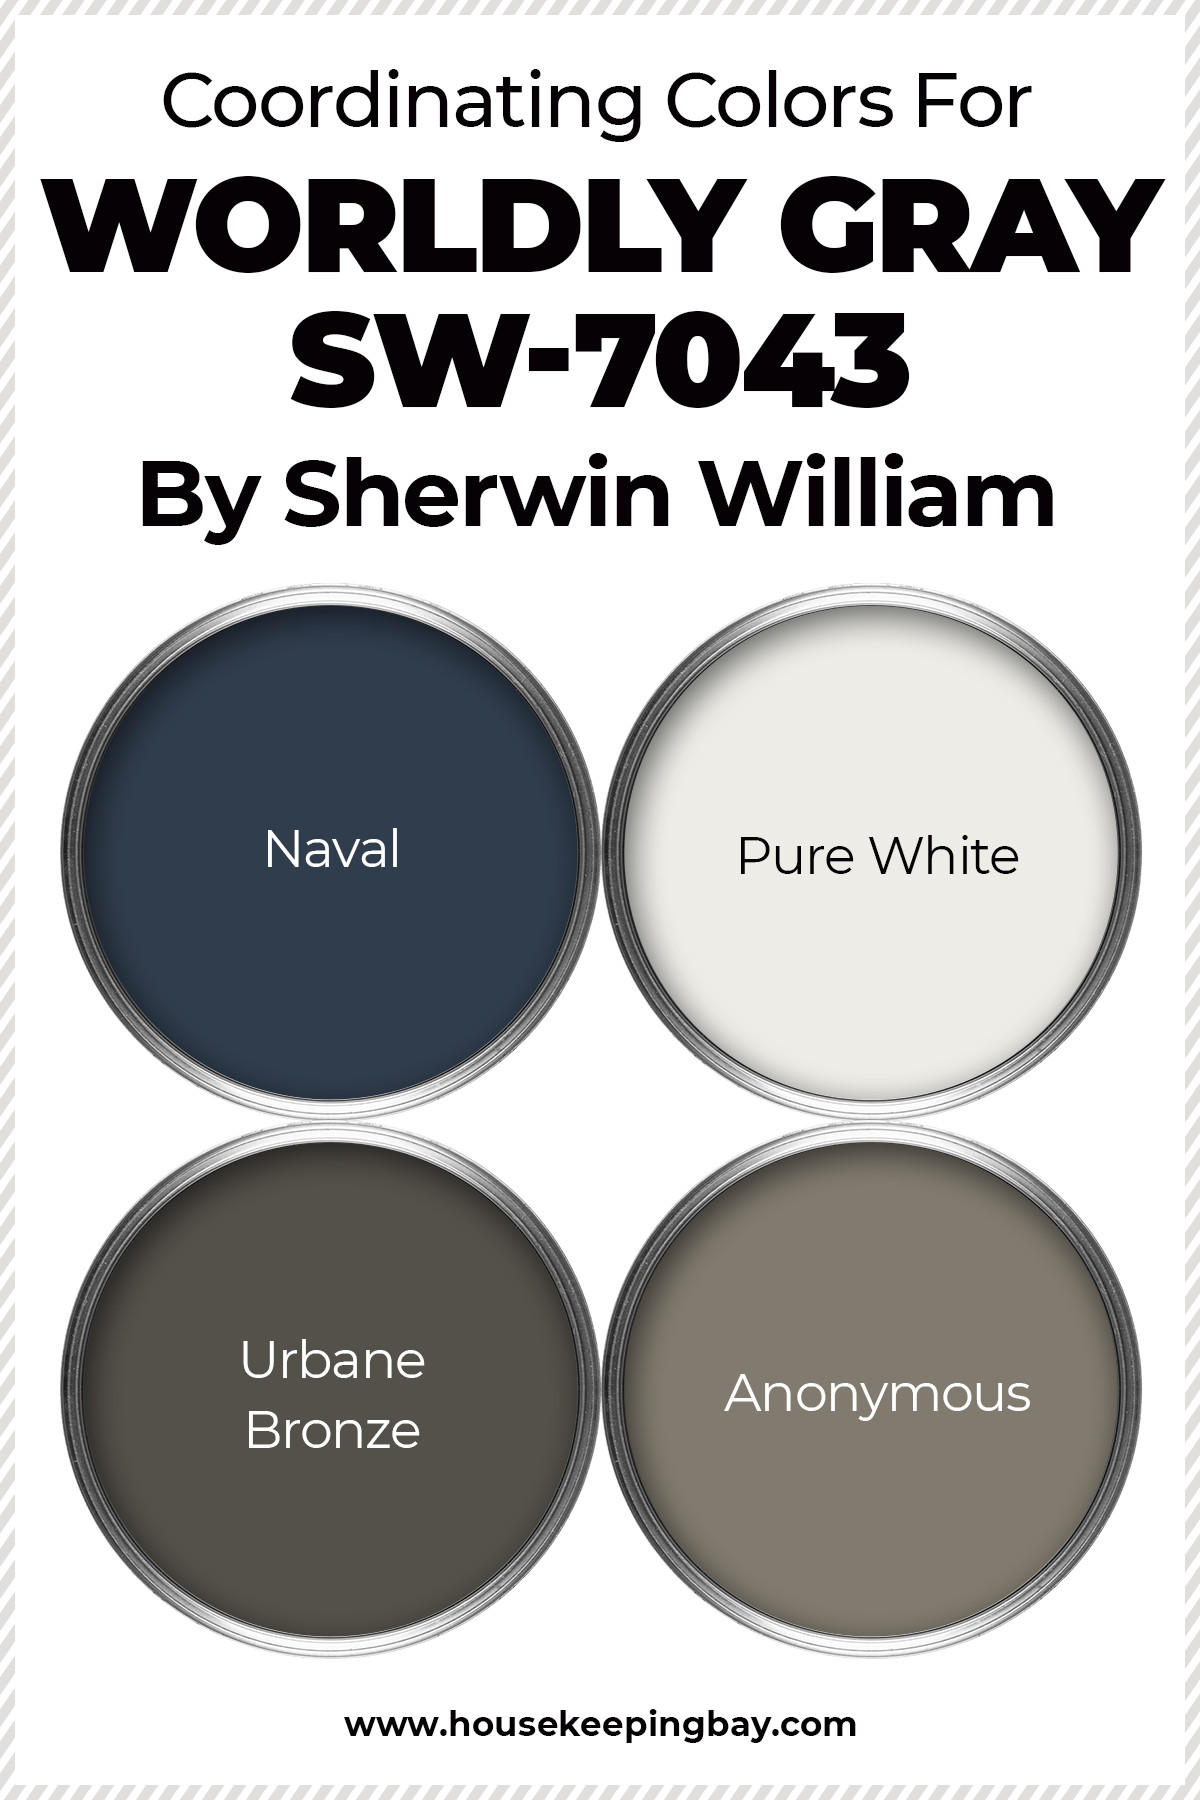 Worldly Gray SW 7043 By Sherwin Williams Coordinating Colors